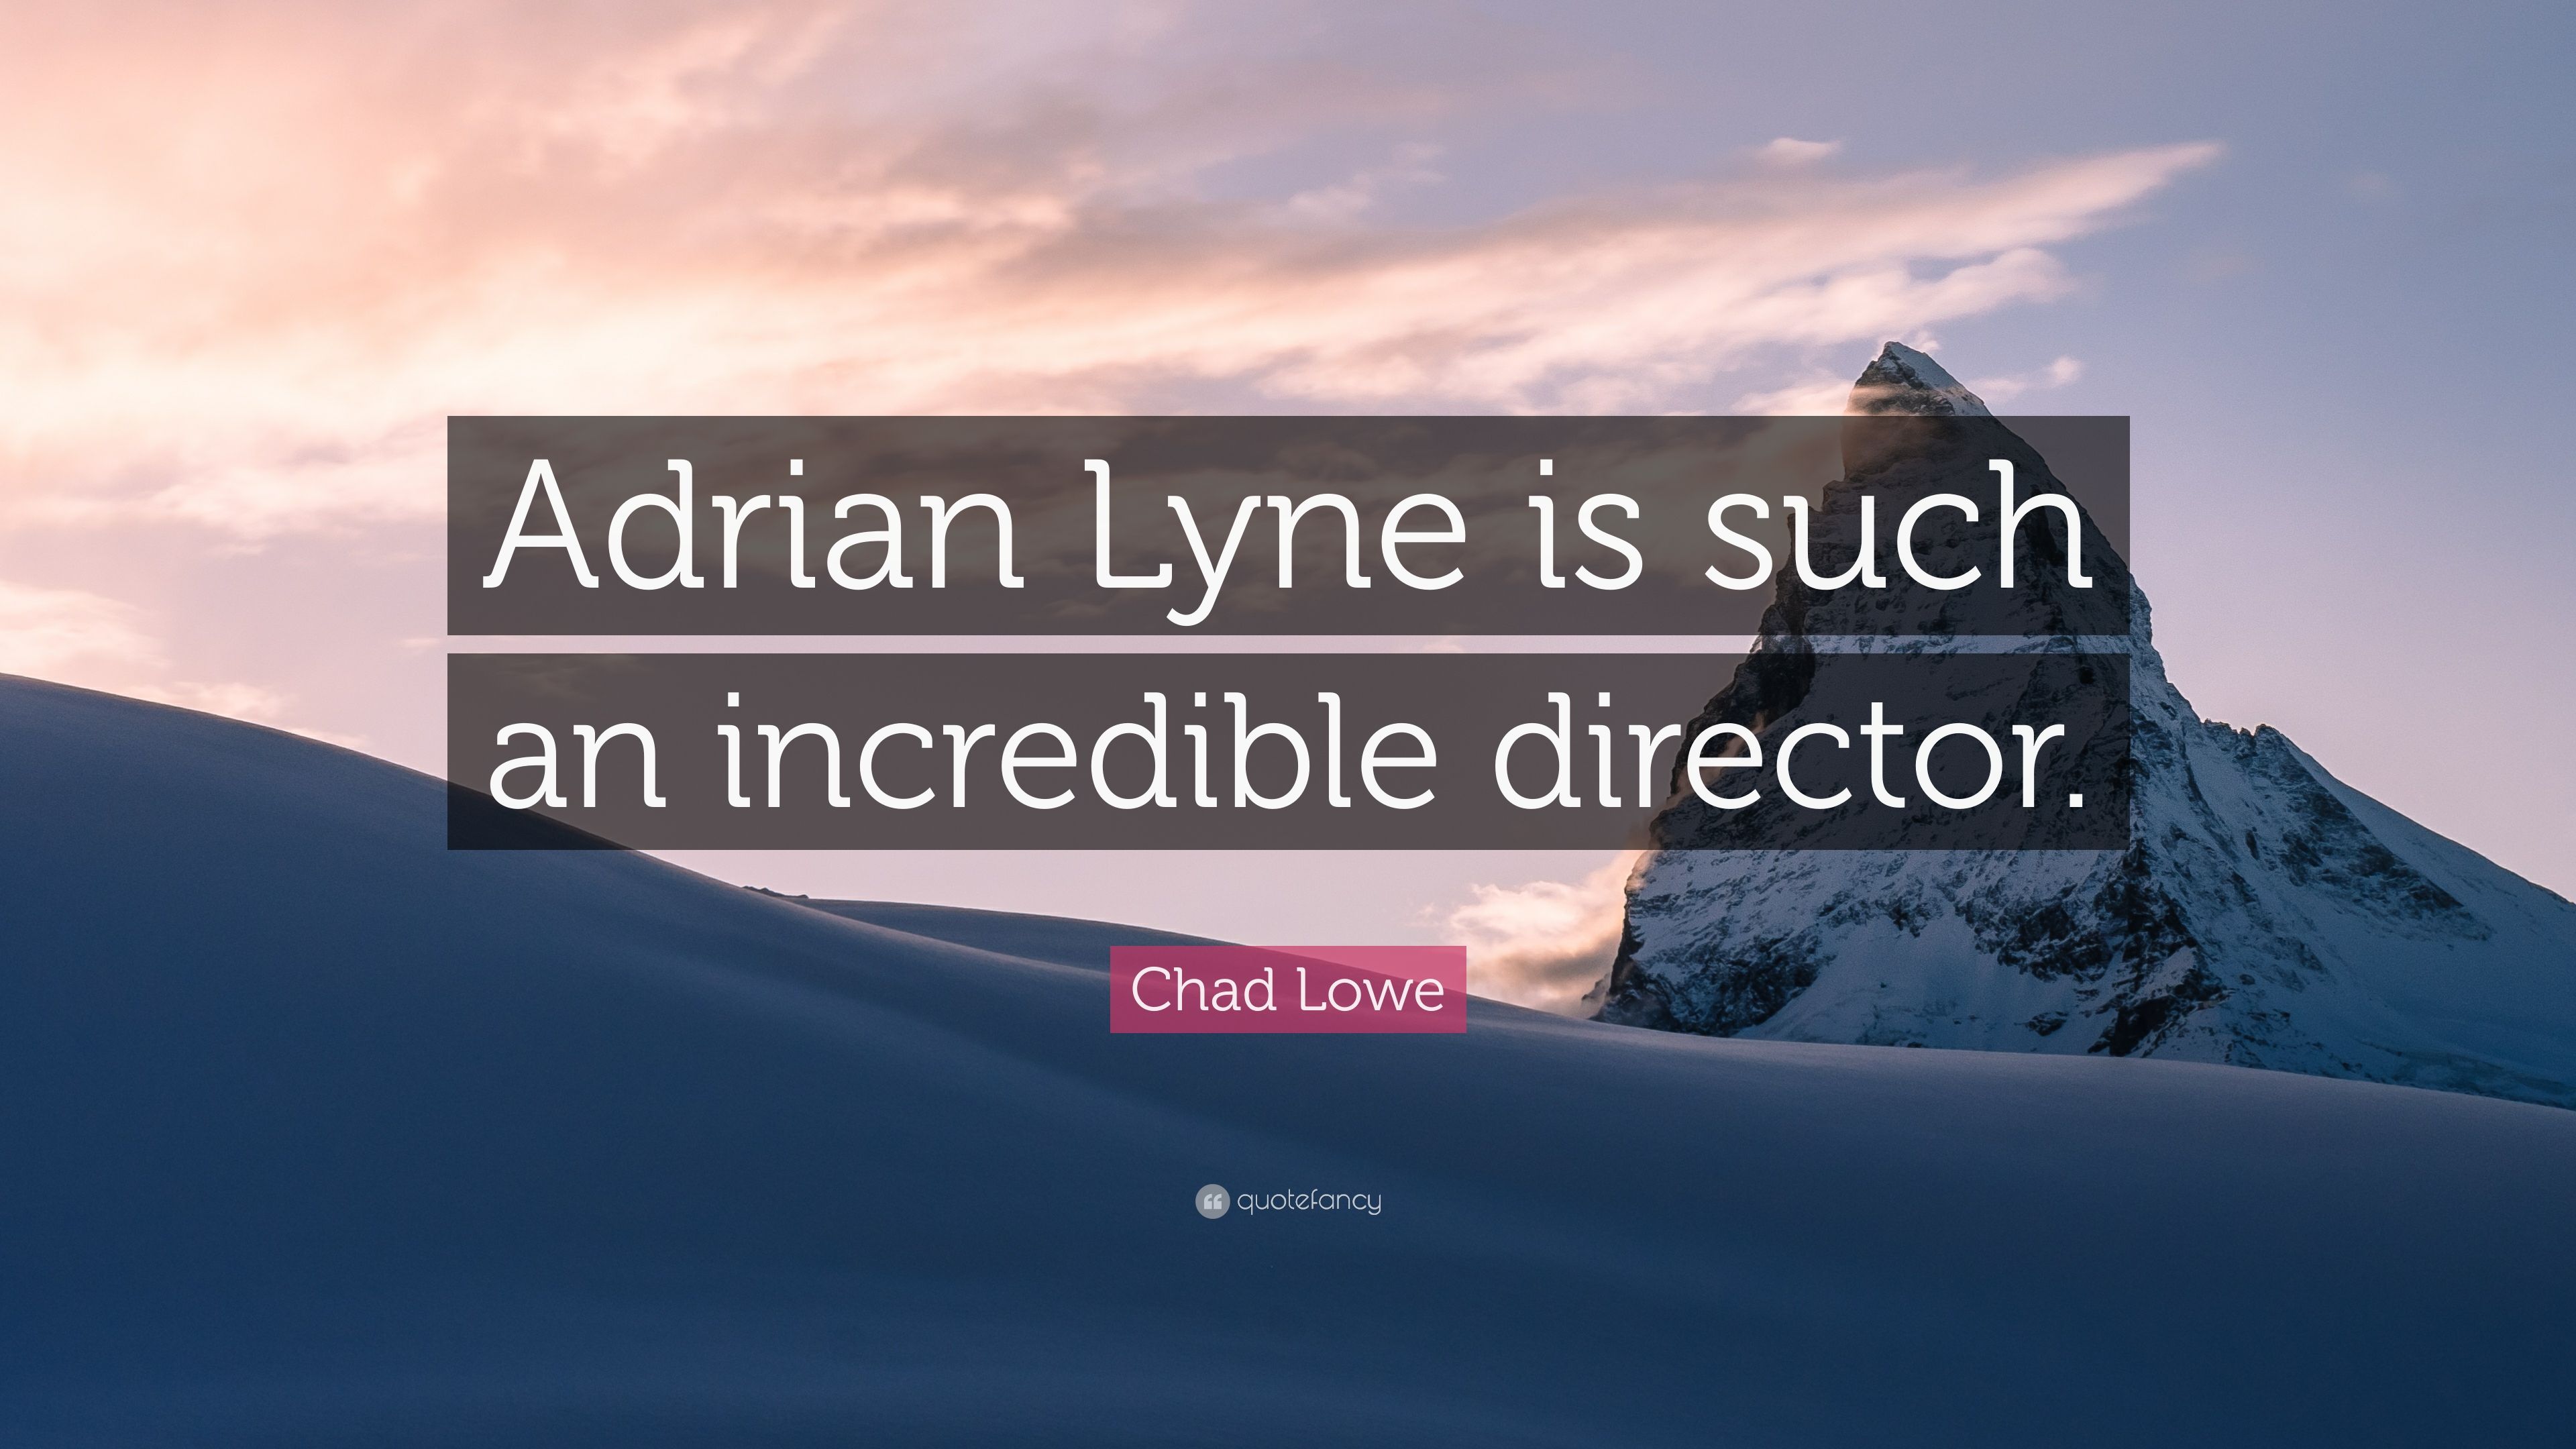 Chad Lowe Quote: “Adrian Lyne is such an incredible director.” 7